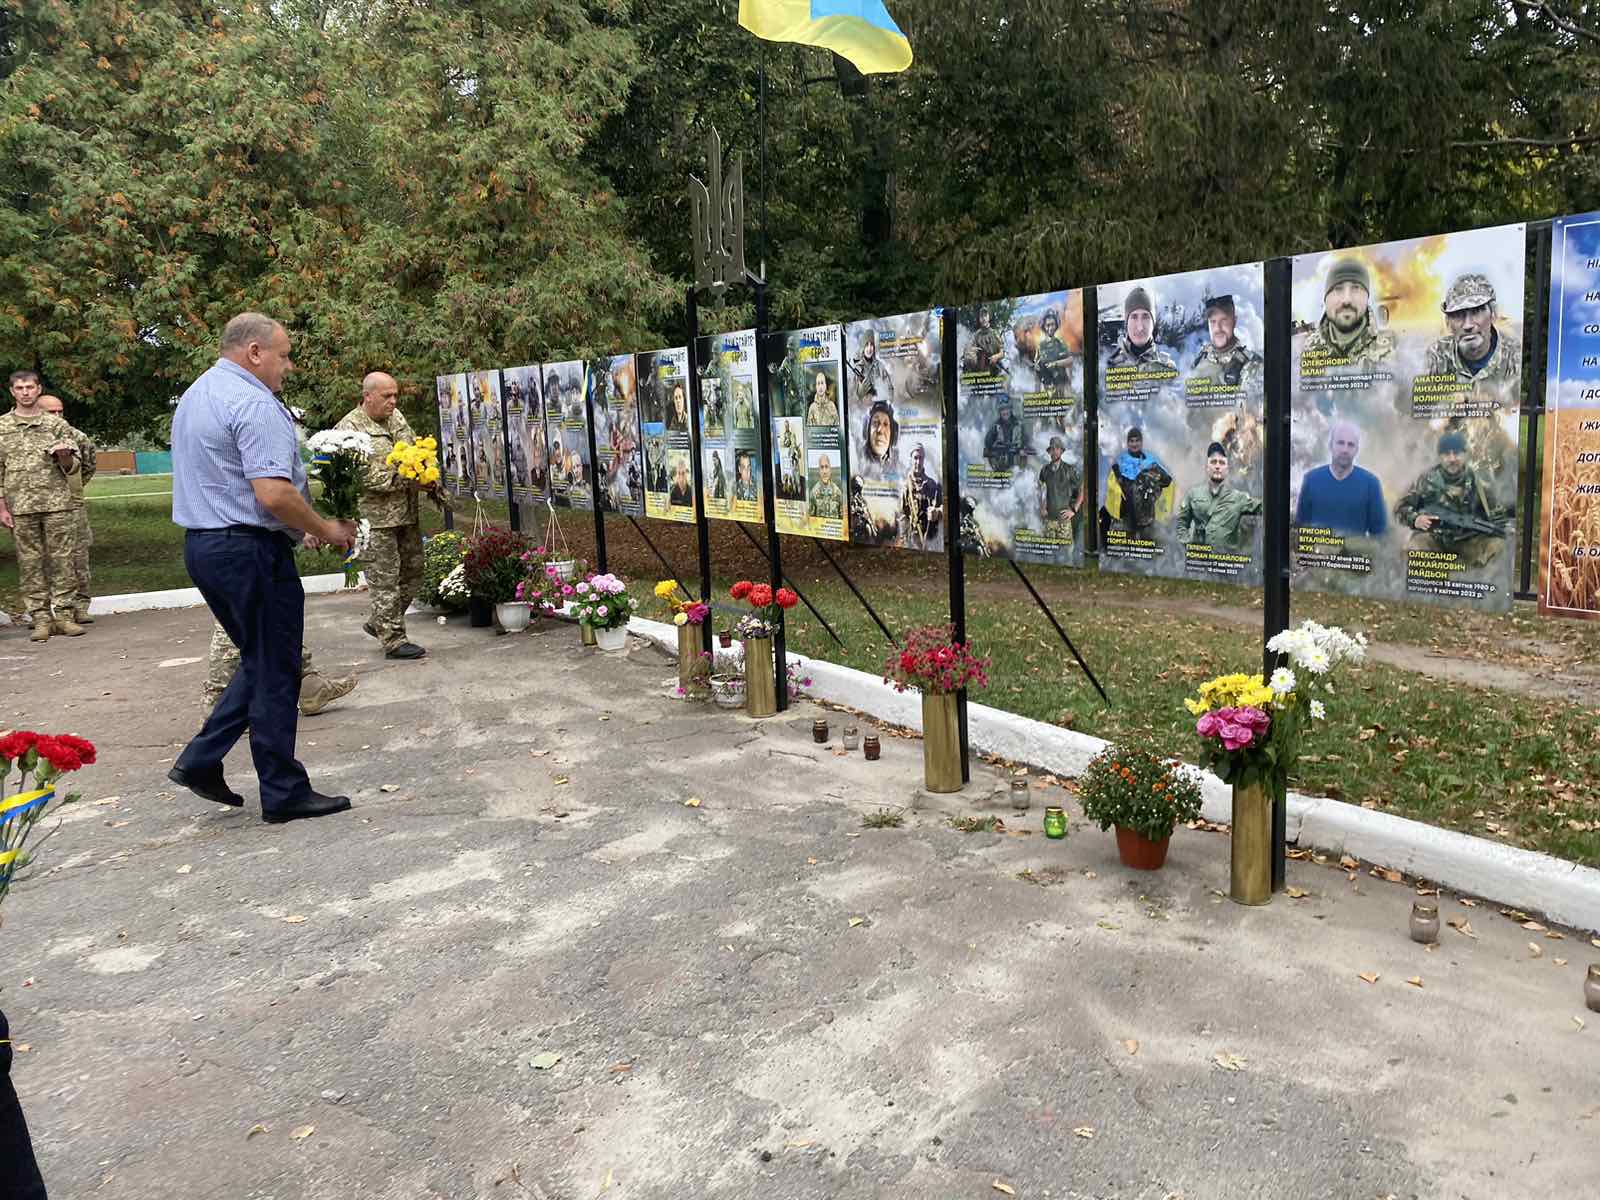 Laying flowers at the memorial sign of defenders of Ukraine